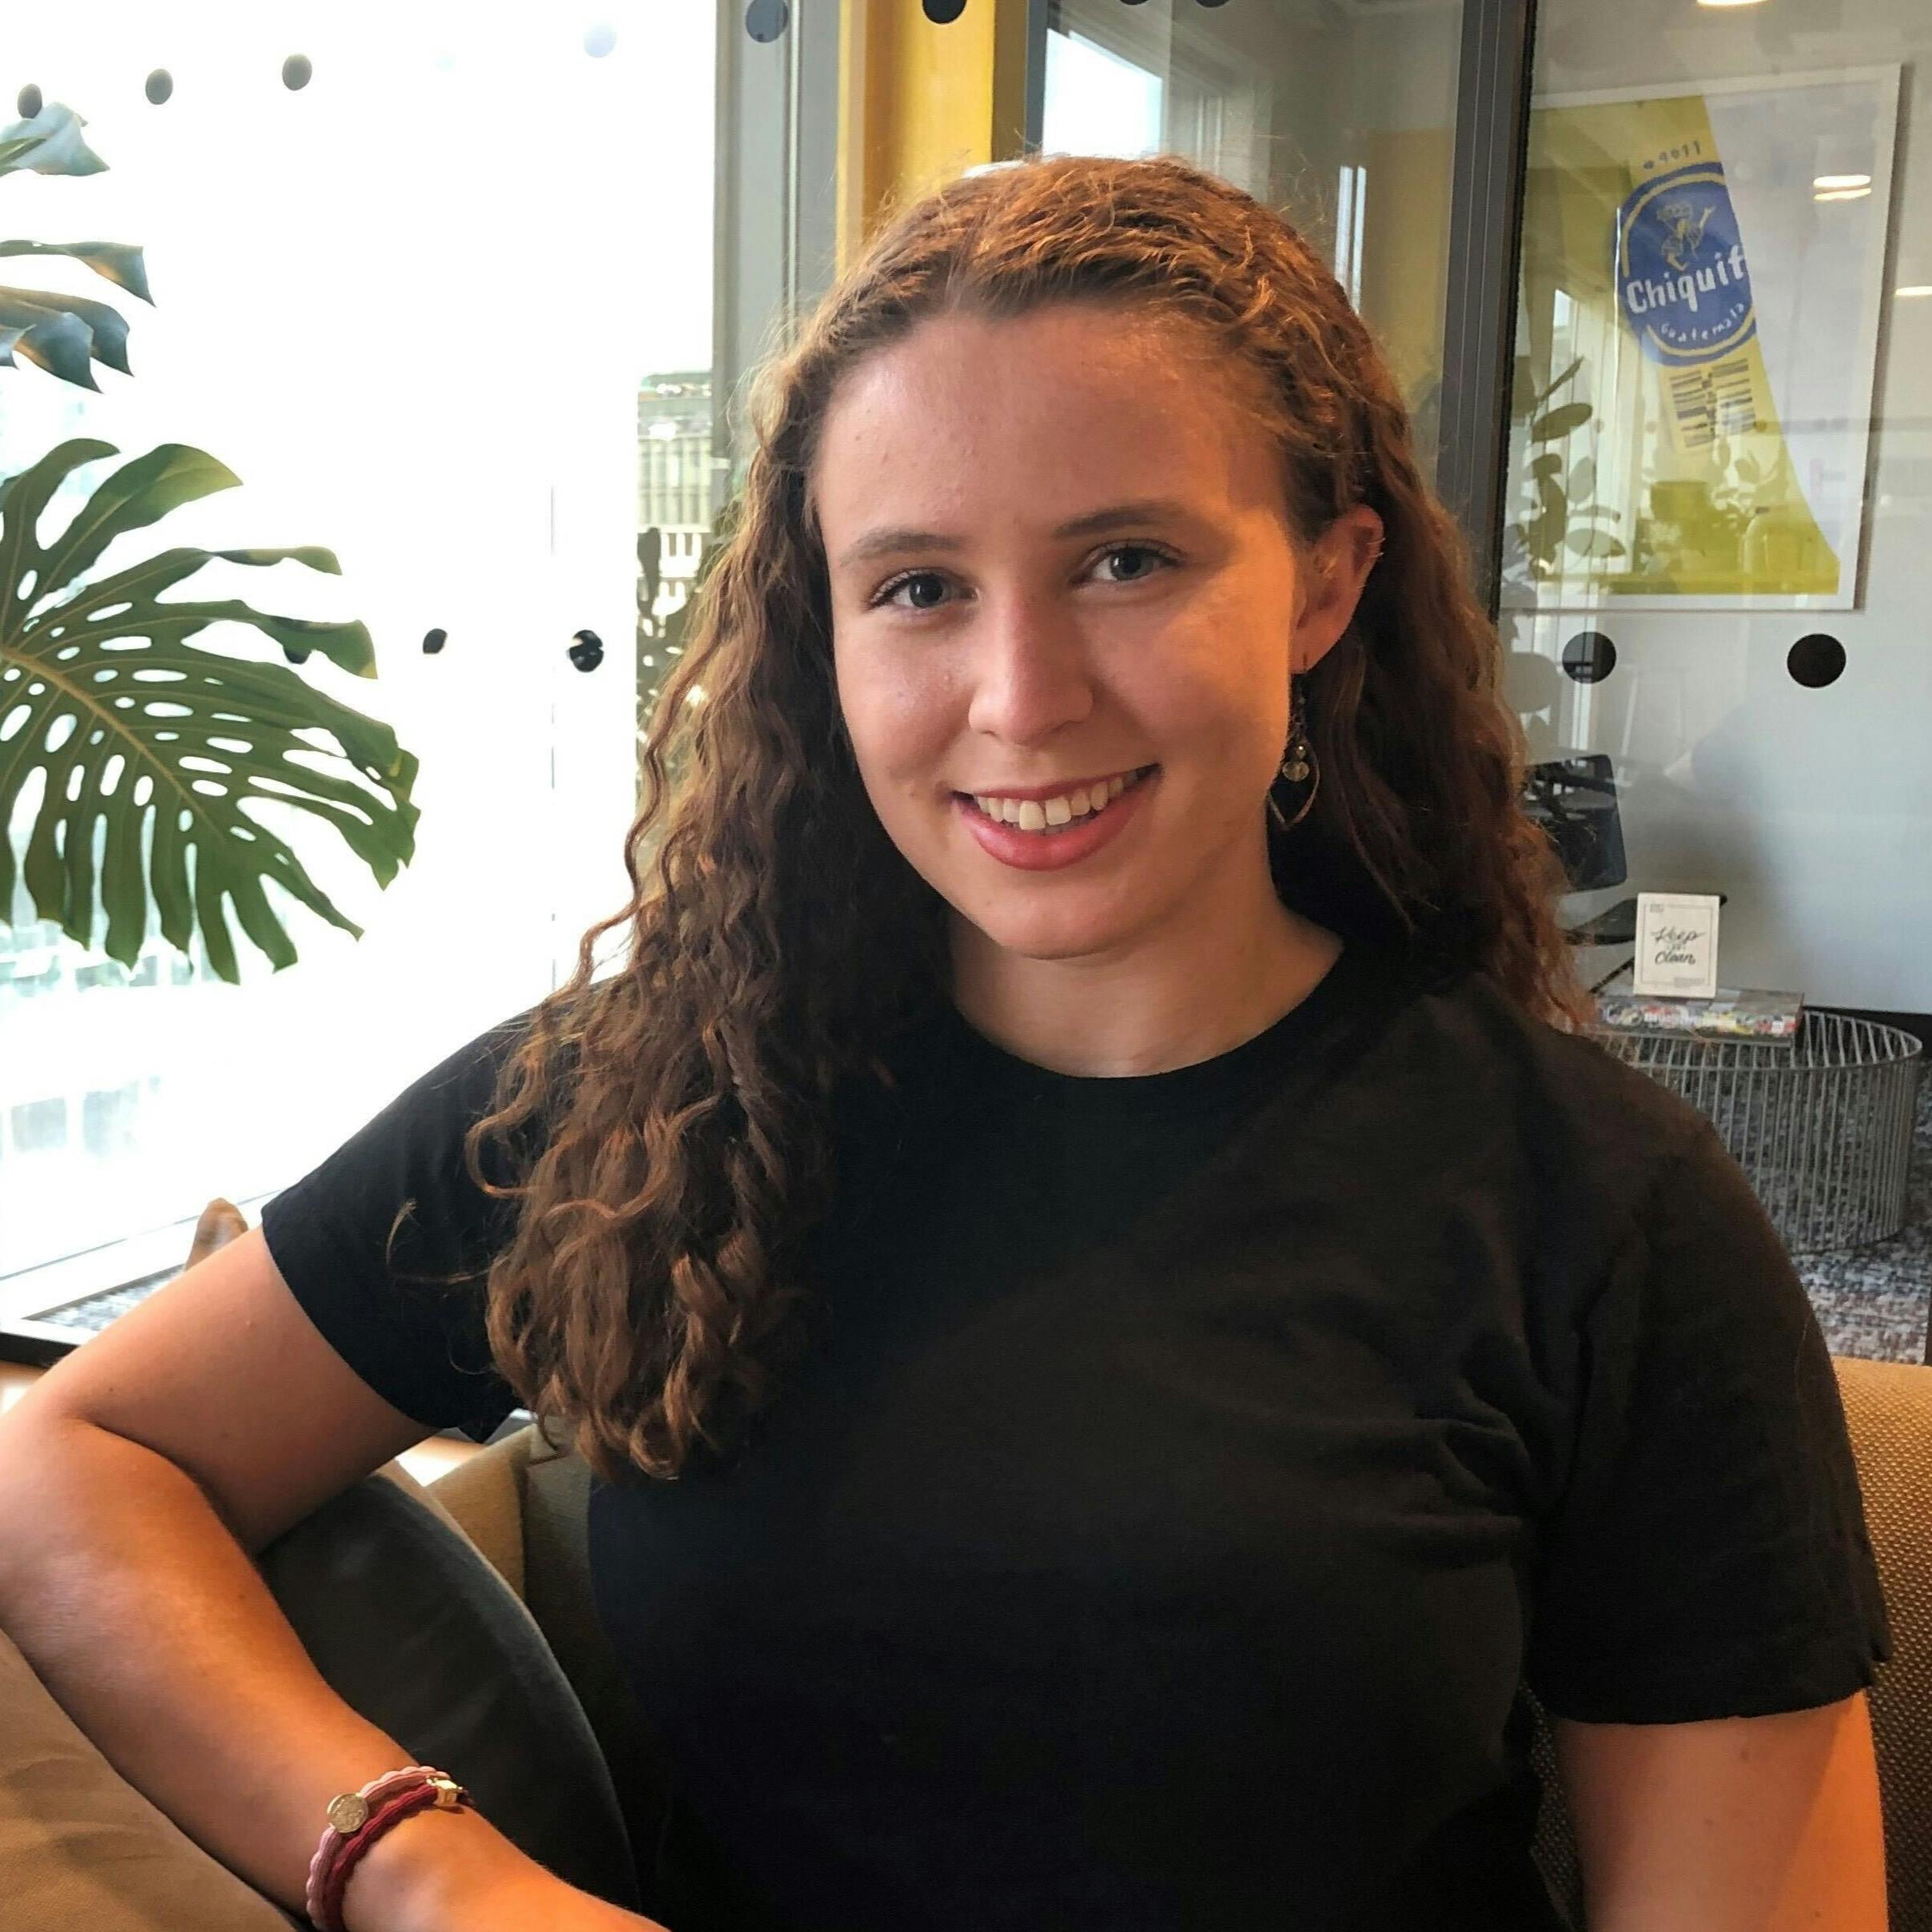 Phoebe is an Economics graduate from the University of Warwick. With a data and analytics background having joined Contic from a FinTech, Phoebe has a keen eye on project progress and success. Phoebe likes to spend time baking, walking and travelling - having spent time in Asia (Bali/Thailand/Sri Lanka) and Europe.